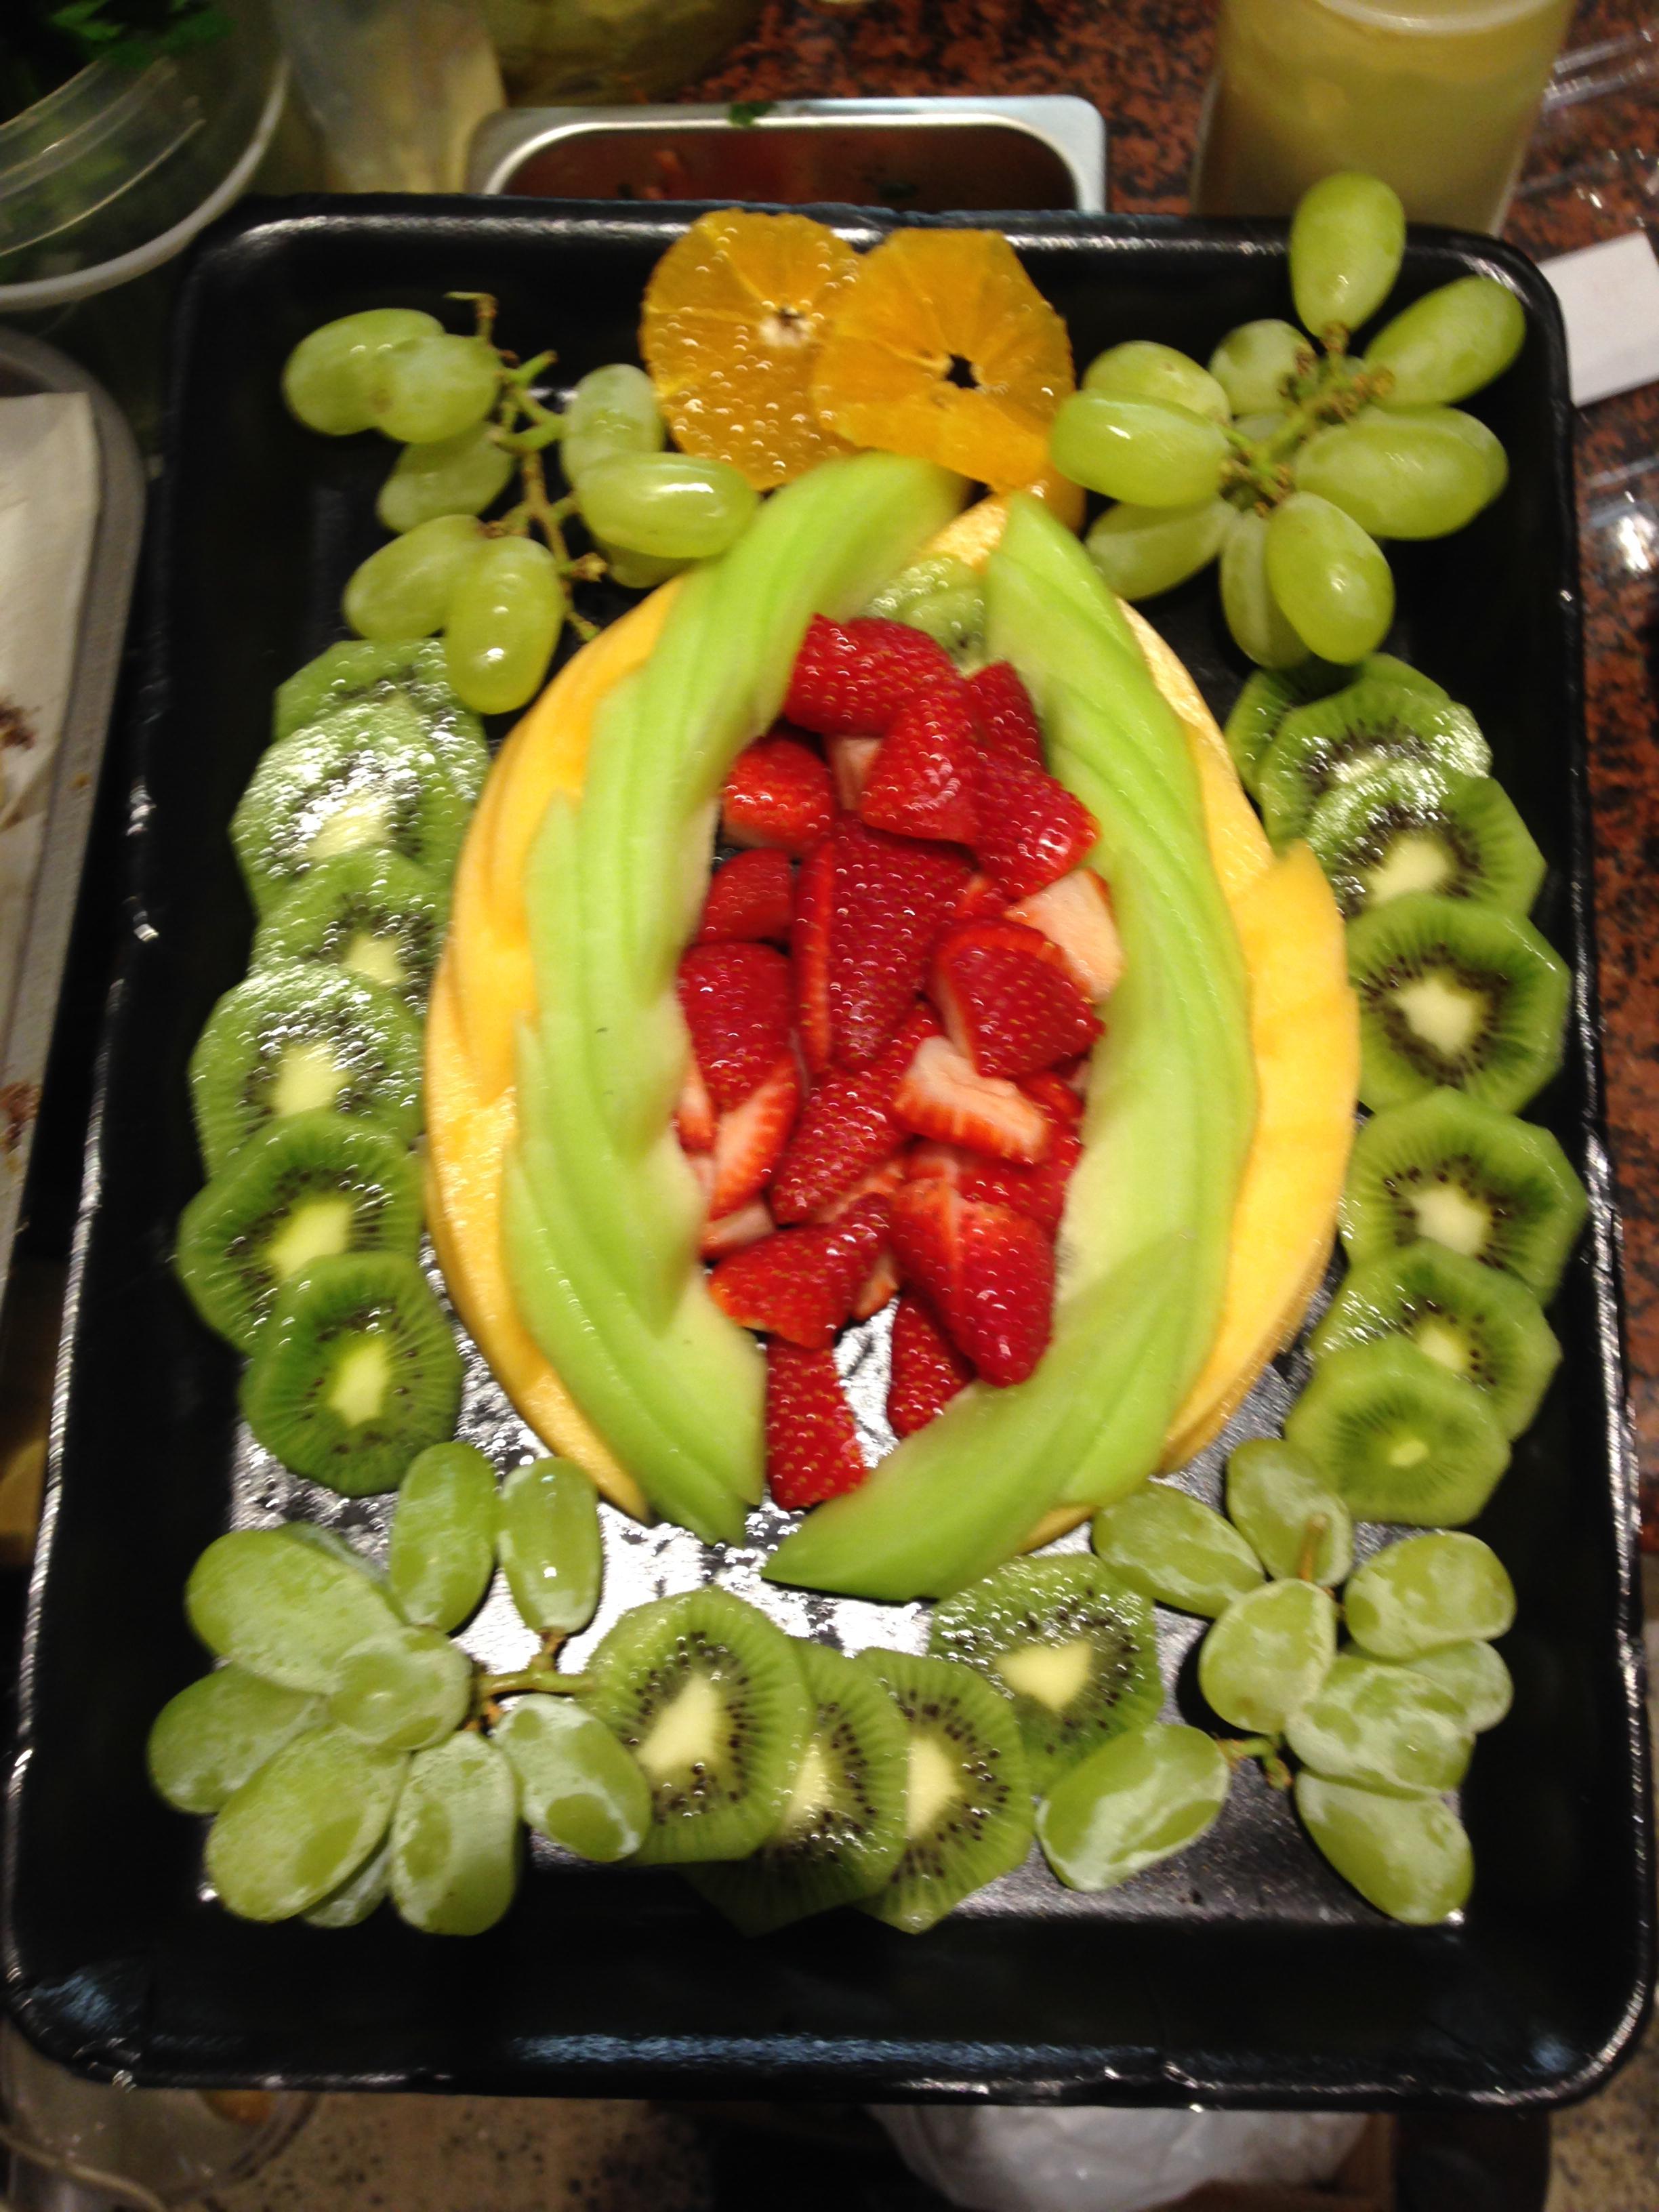 Had to explain to the chef why his fruit platter layout was a little ...